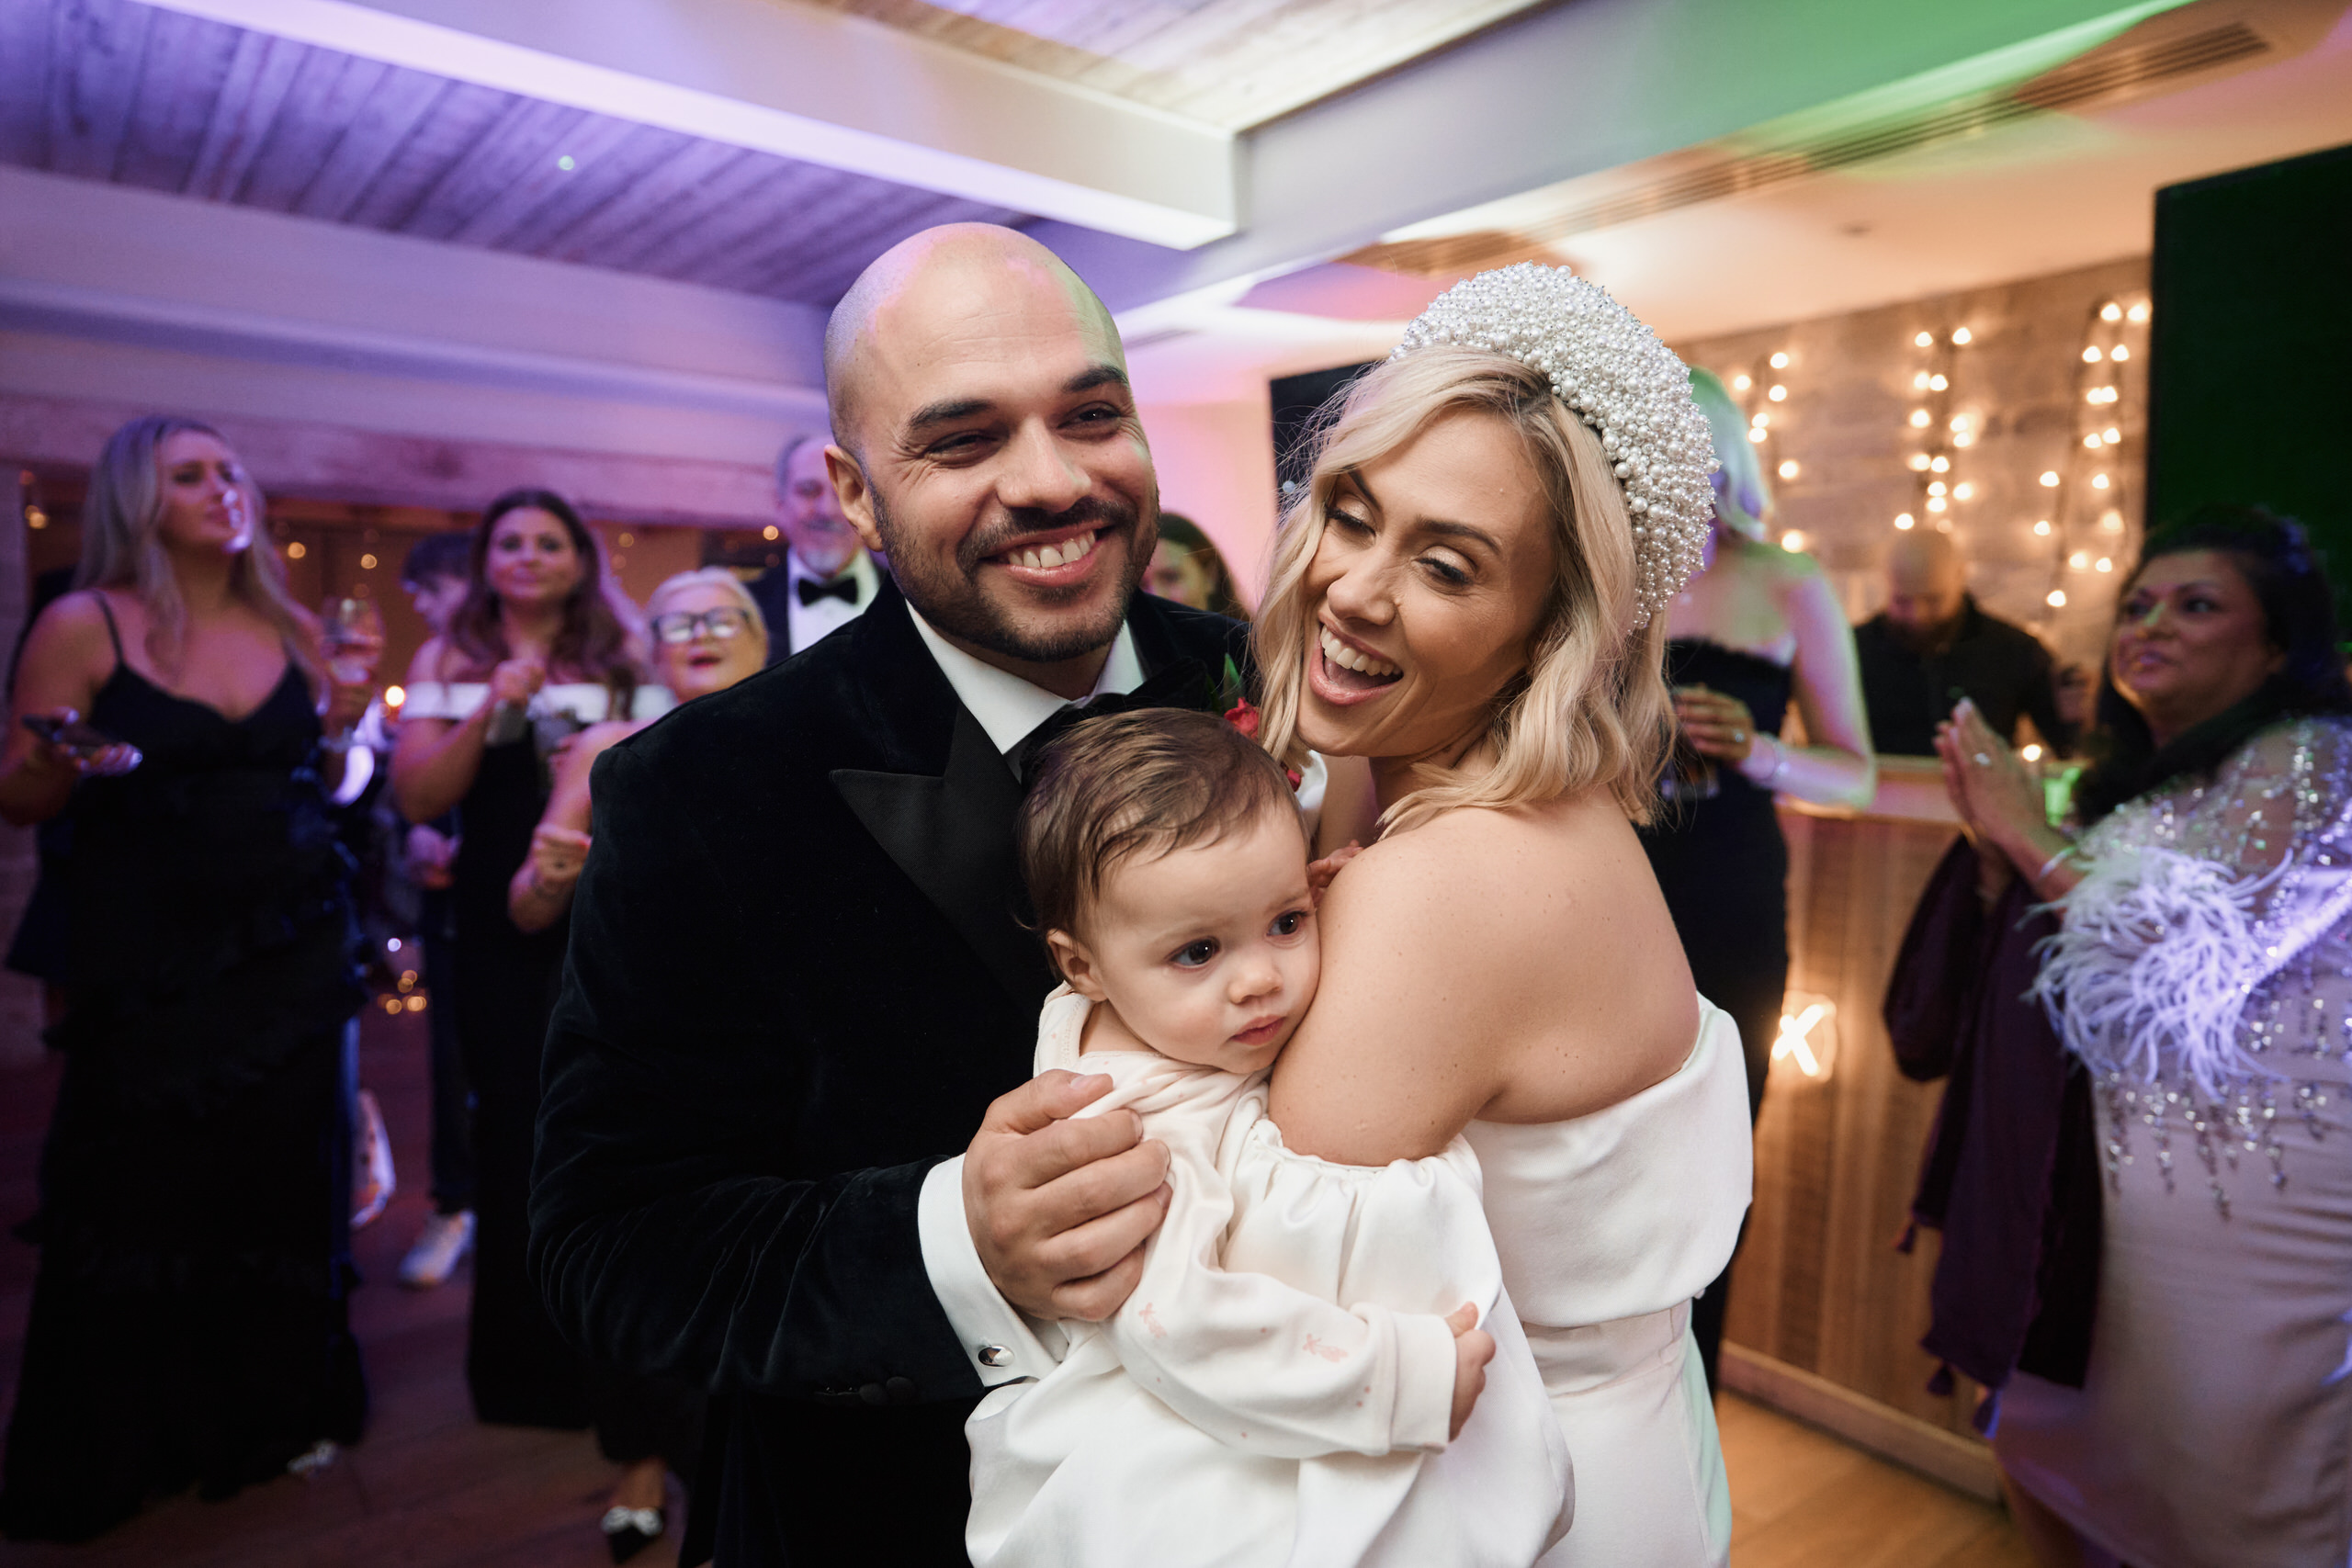 A couple holding a baby on the dance floor at their wedding.